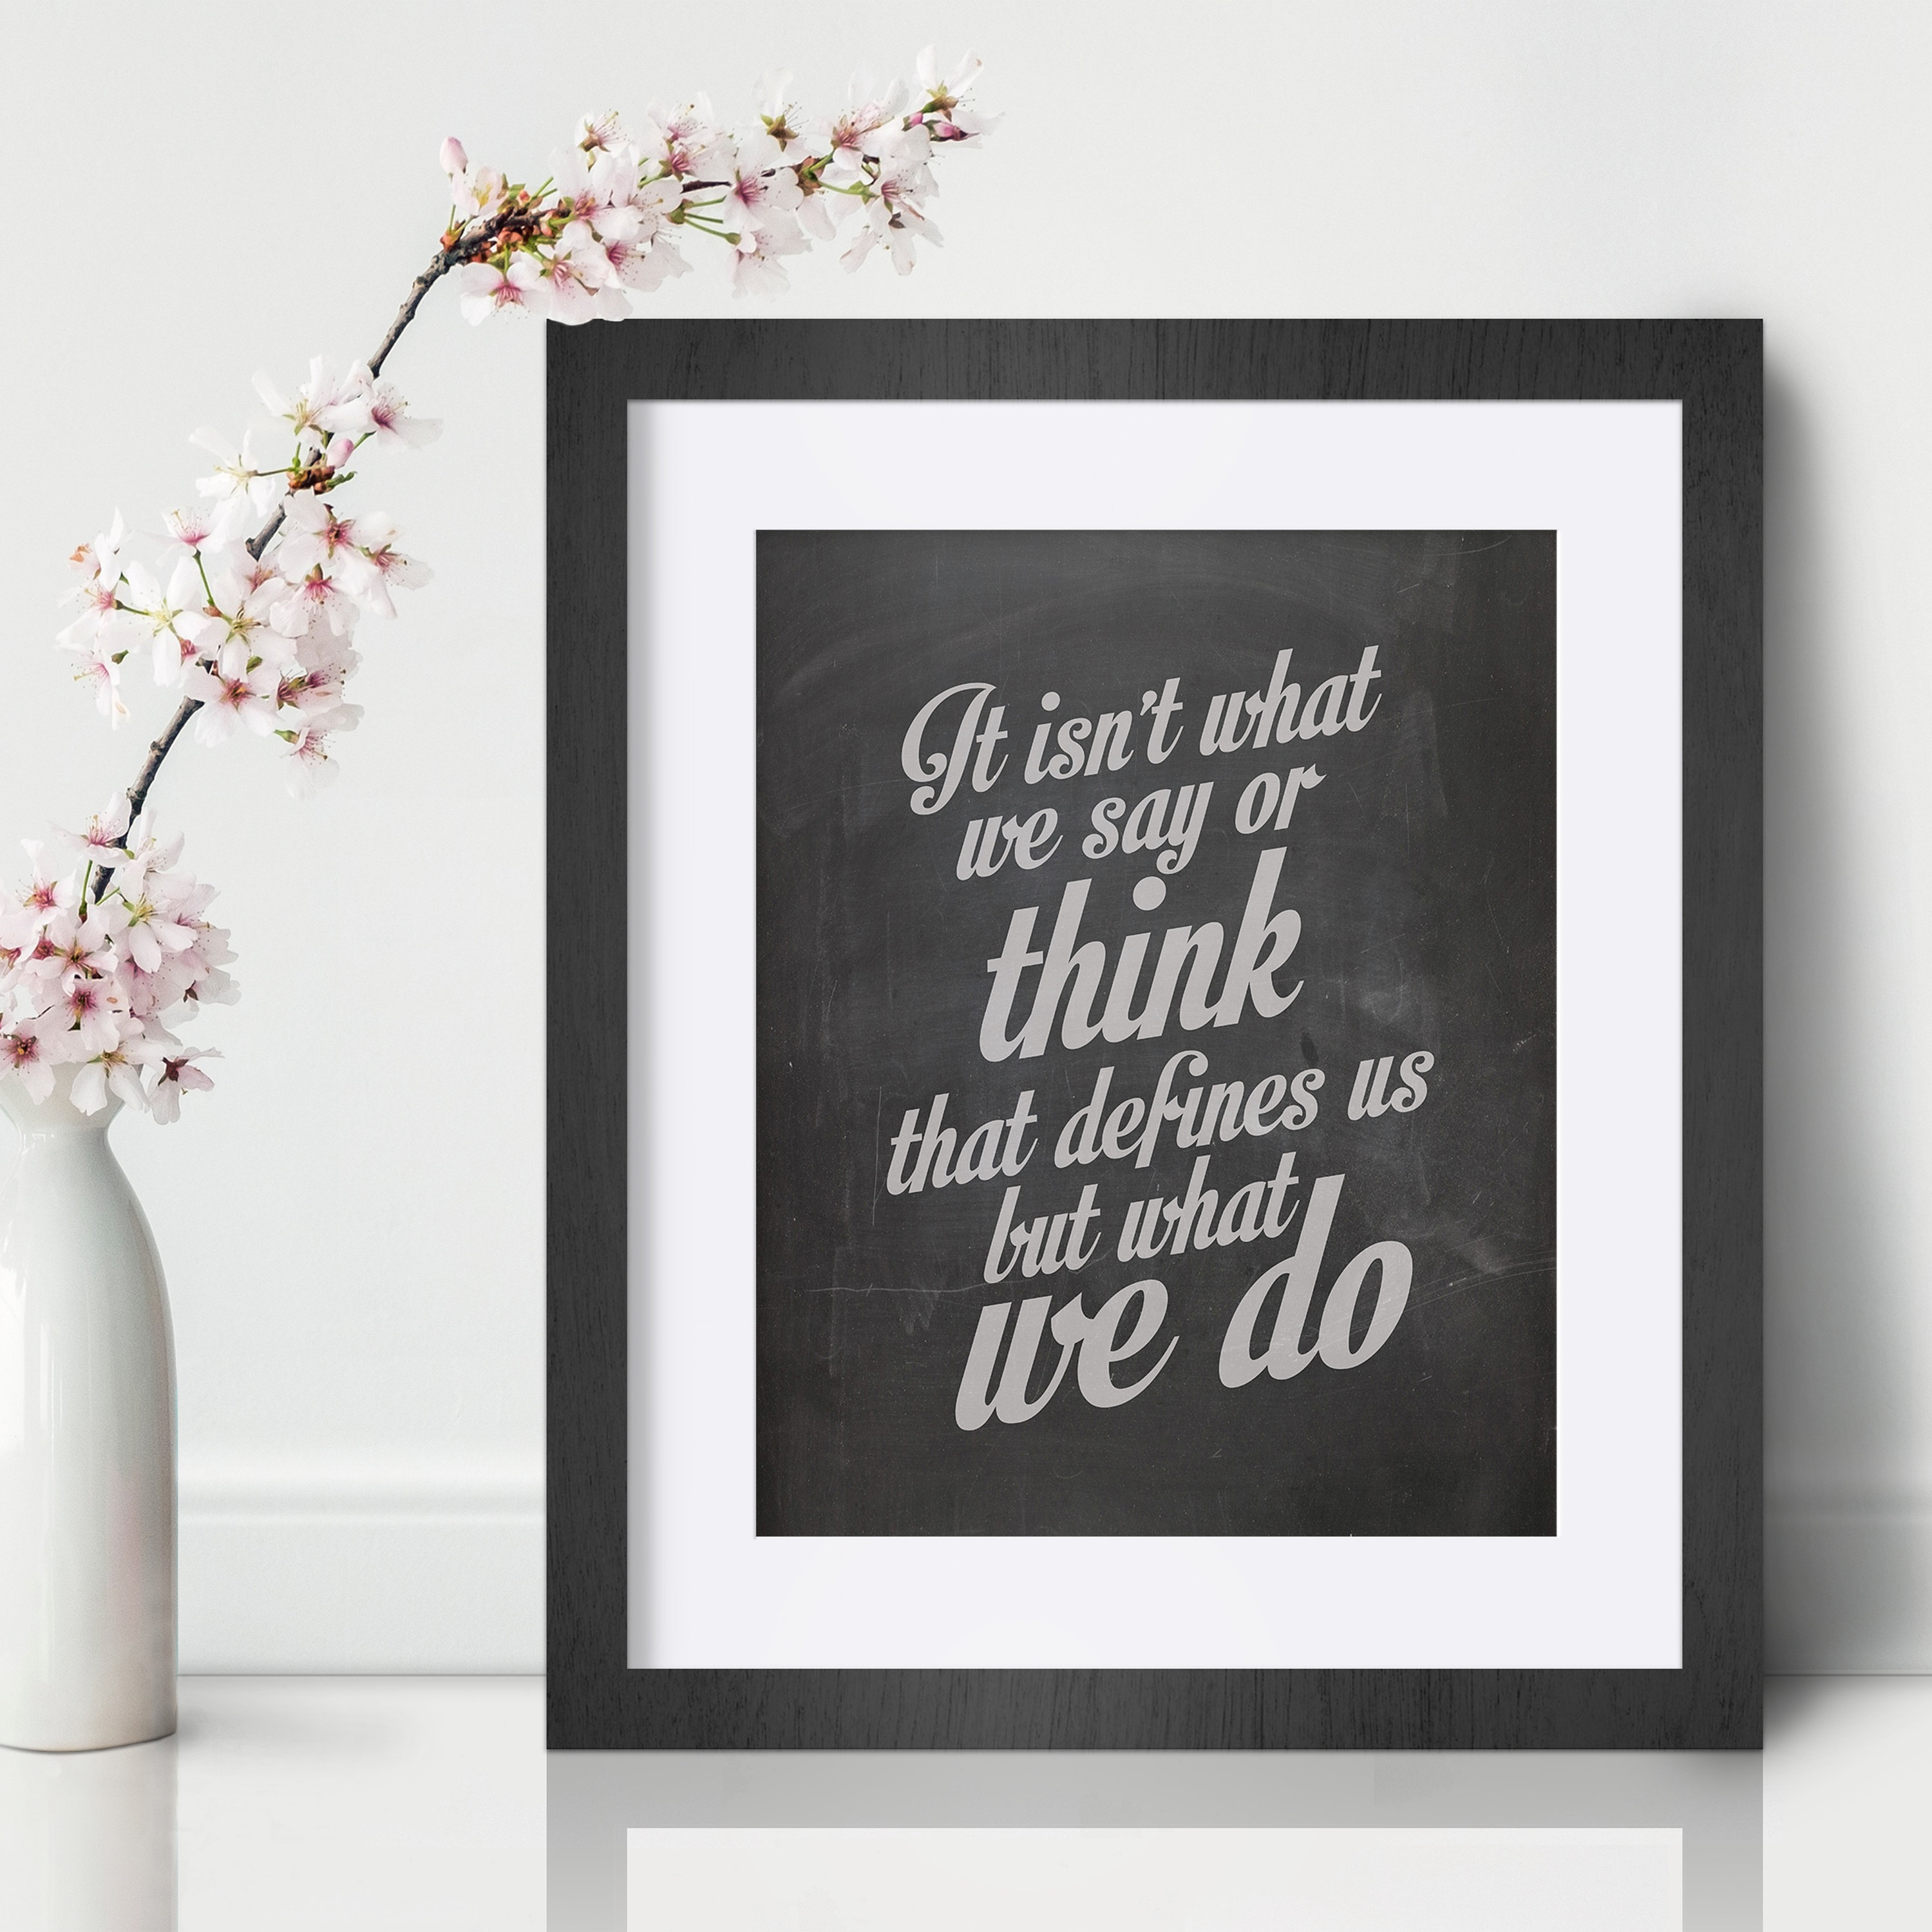 Motivational inspirational quote positive life poster picture print wall art 387